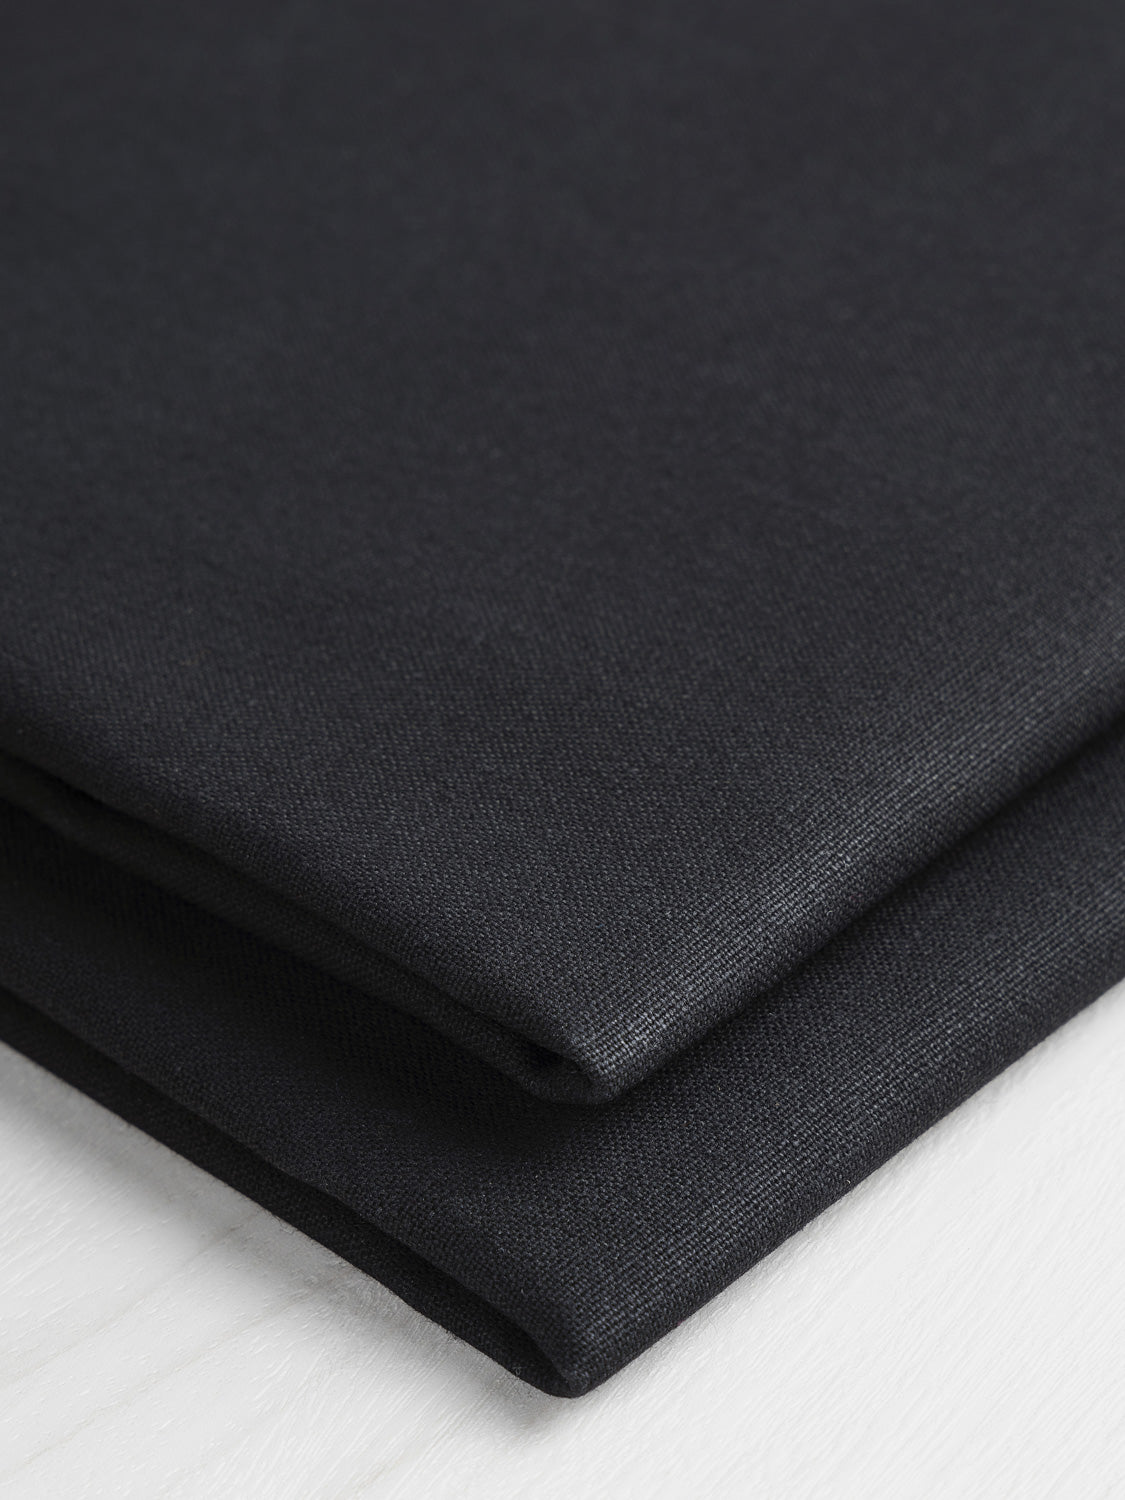 What Is Waxed Canvas Fabric? – PaCanva